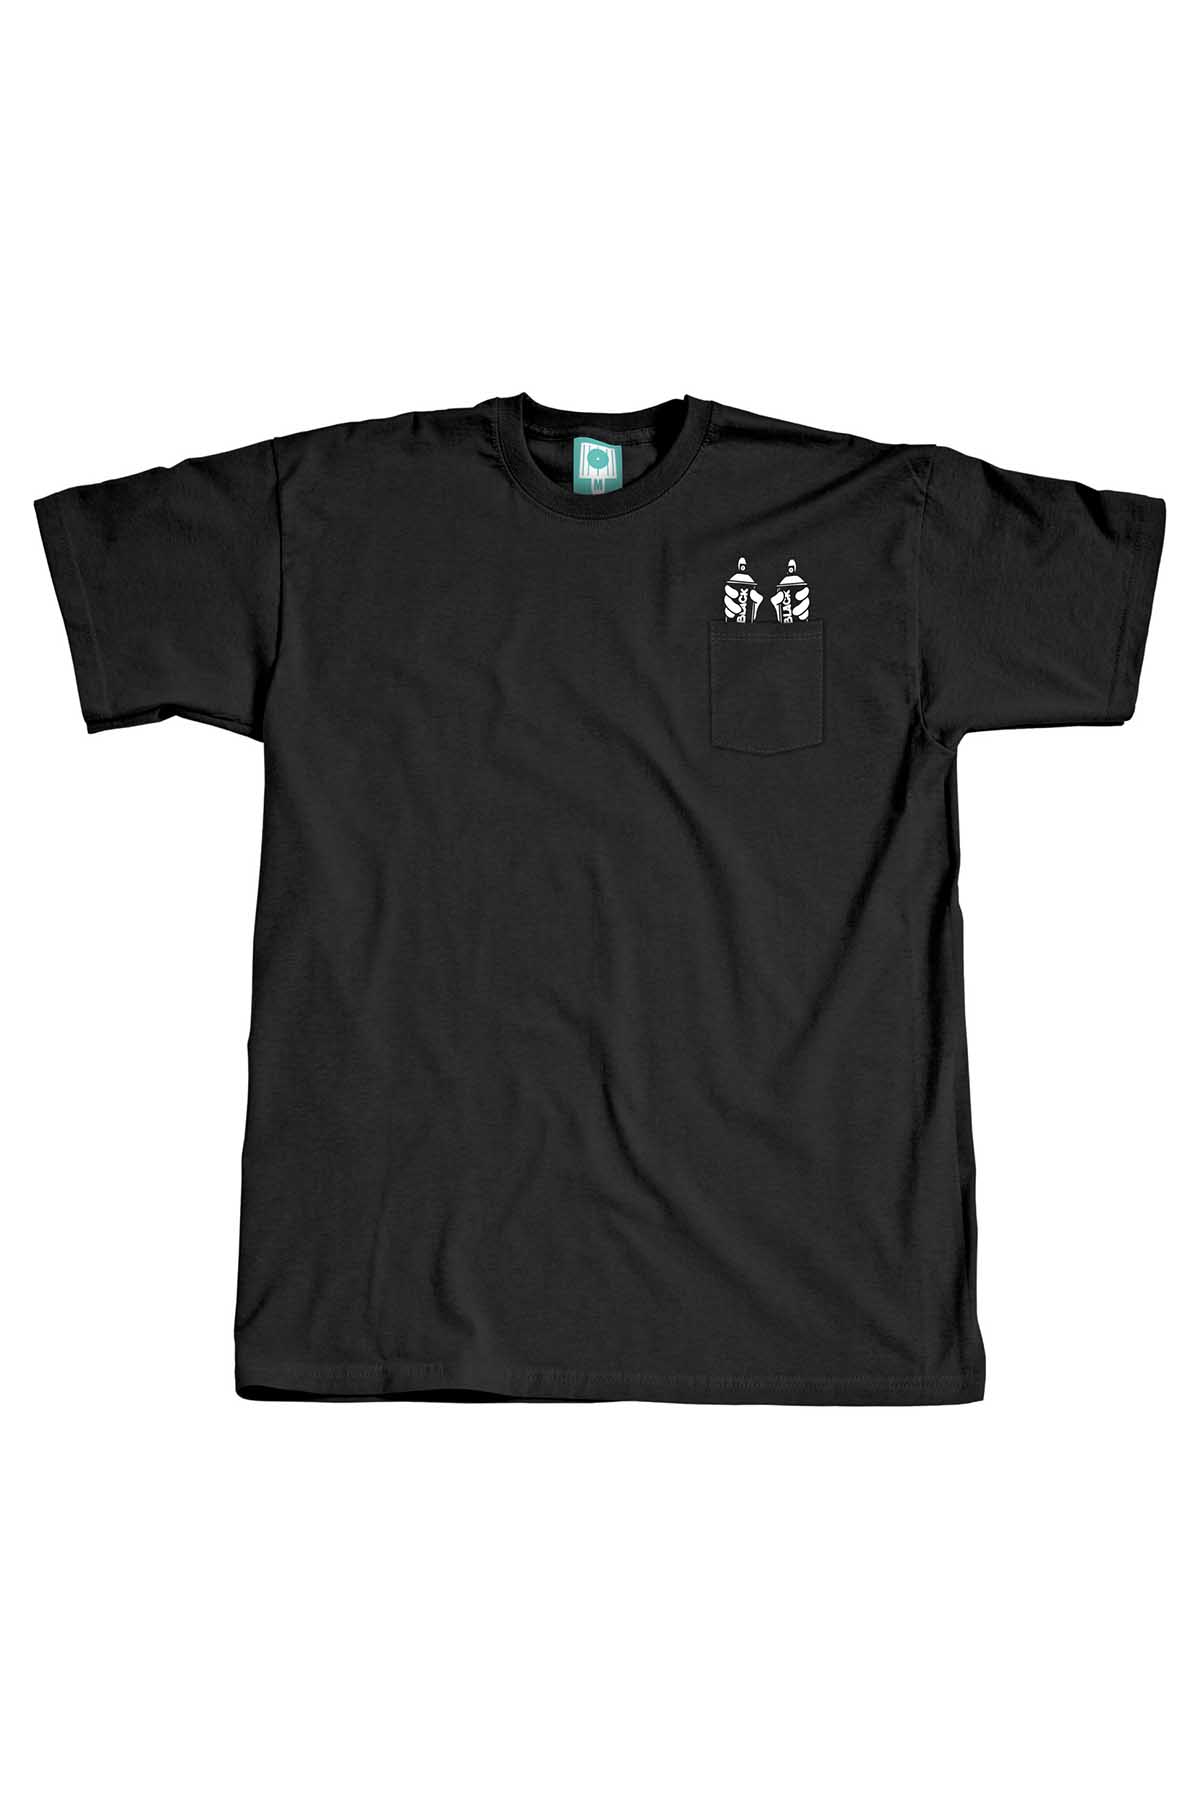 Montana BLACK CANS Pocket T-Shirt by Superspray